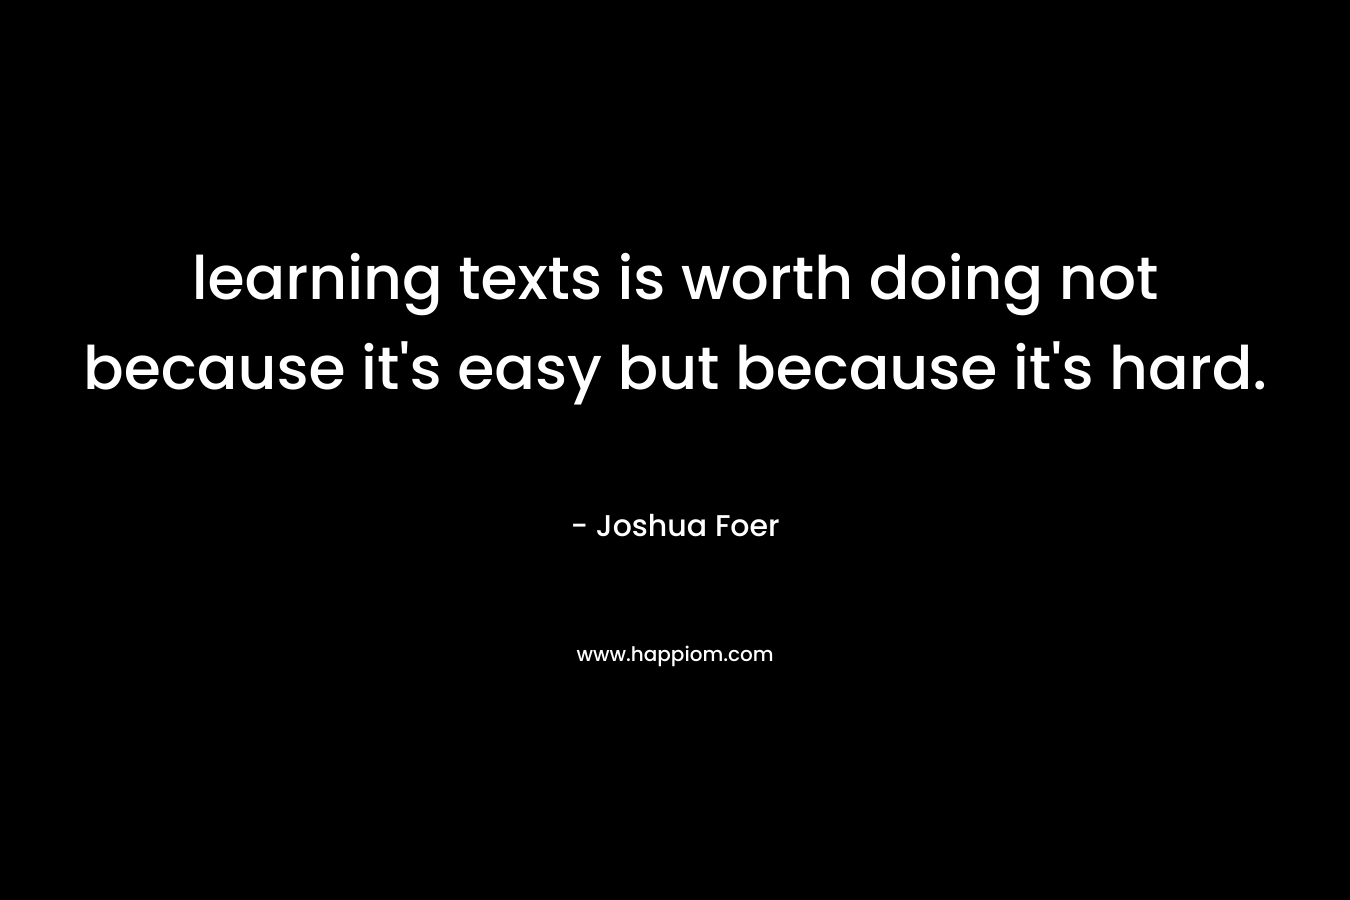 learning texts is worth doing not because it’s easy but because it’s hard. – Joshua Foer